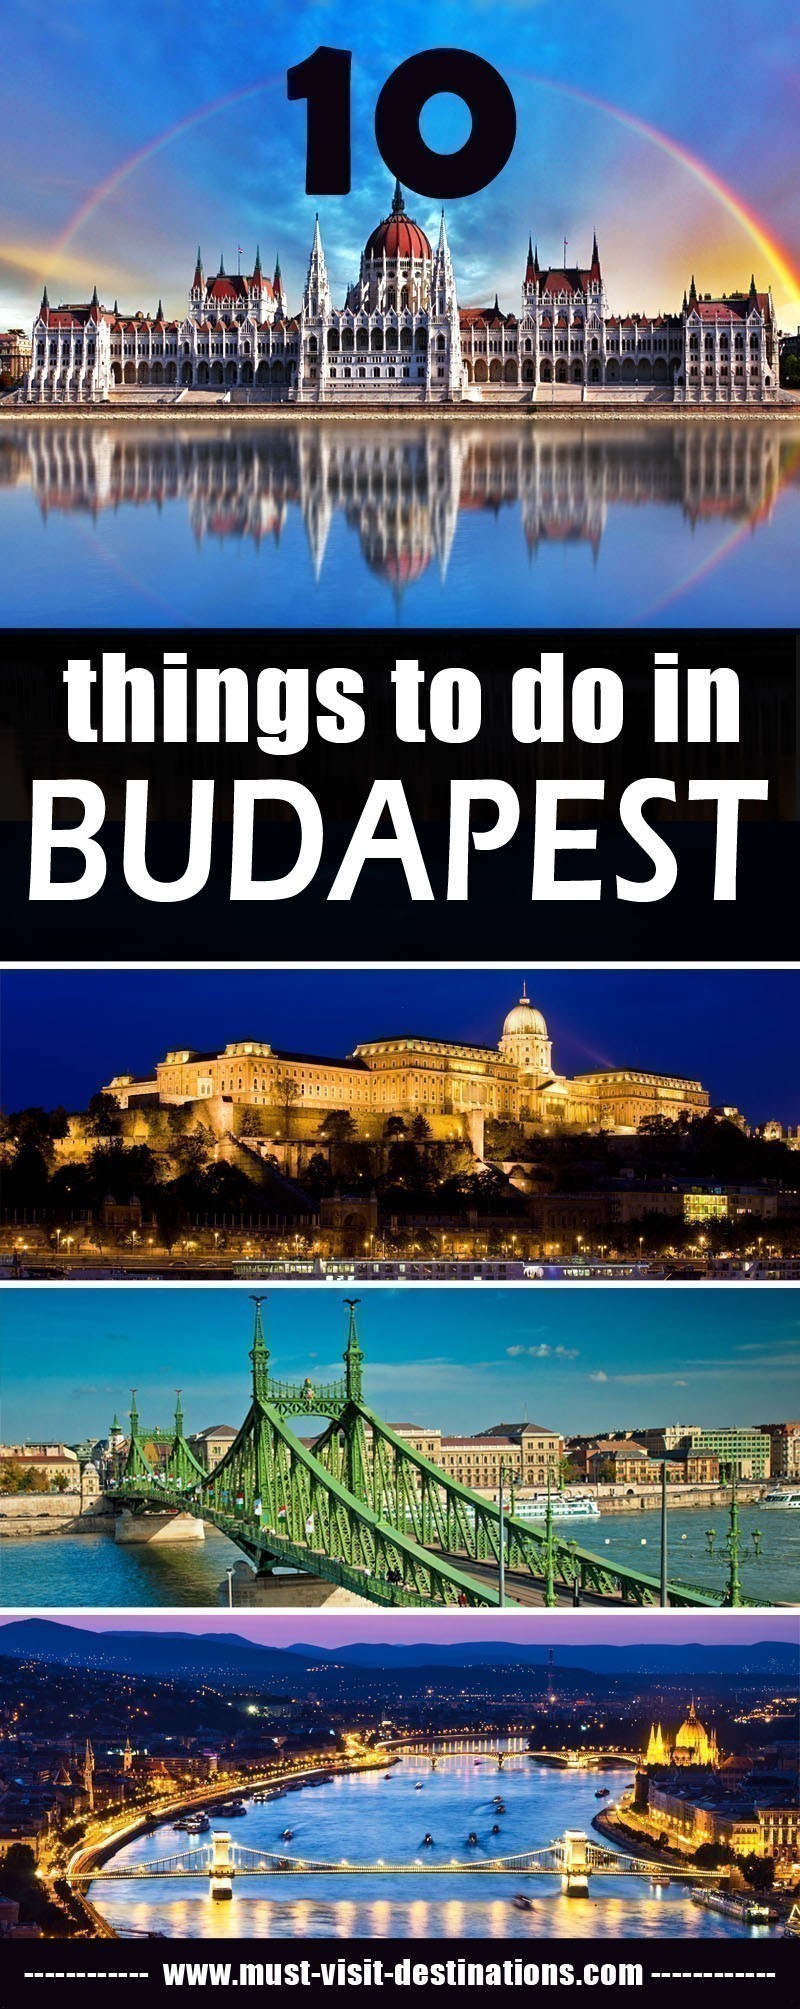 10 Things To Do in Budapest #travel #culture #budapest